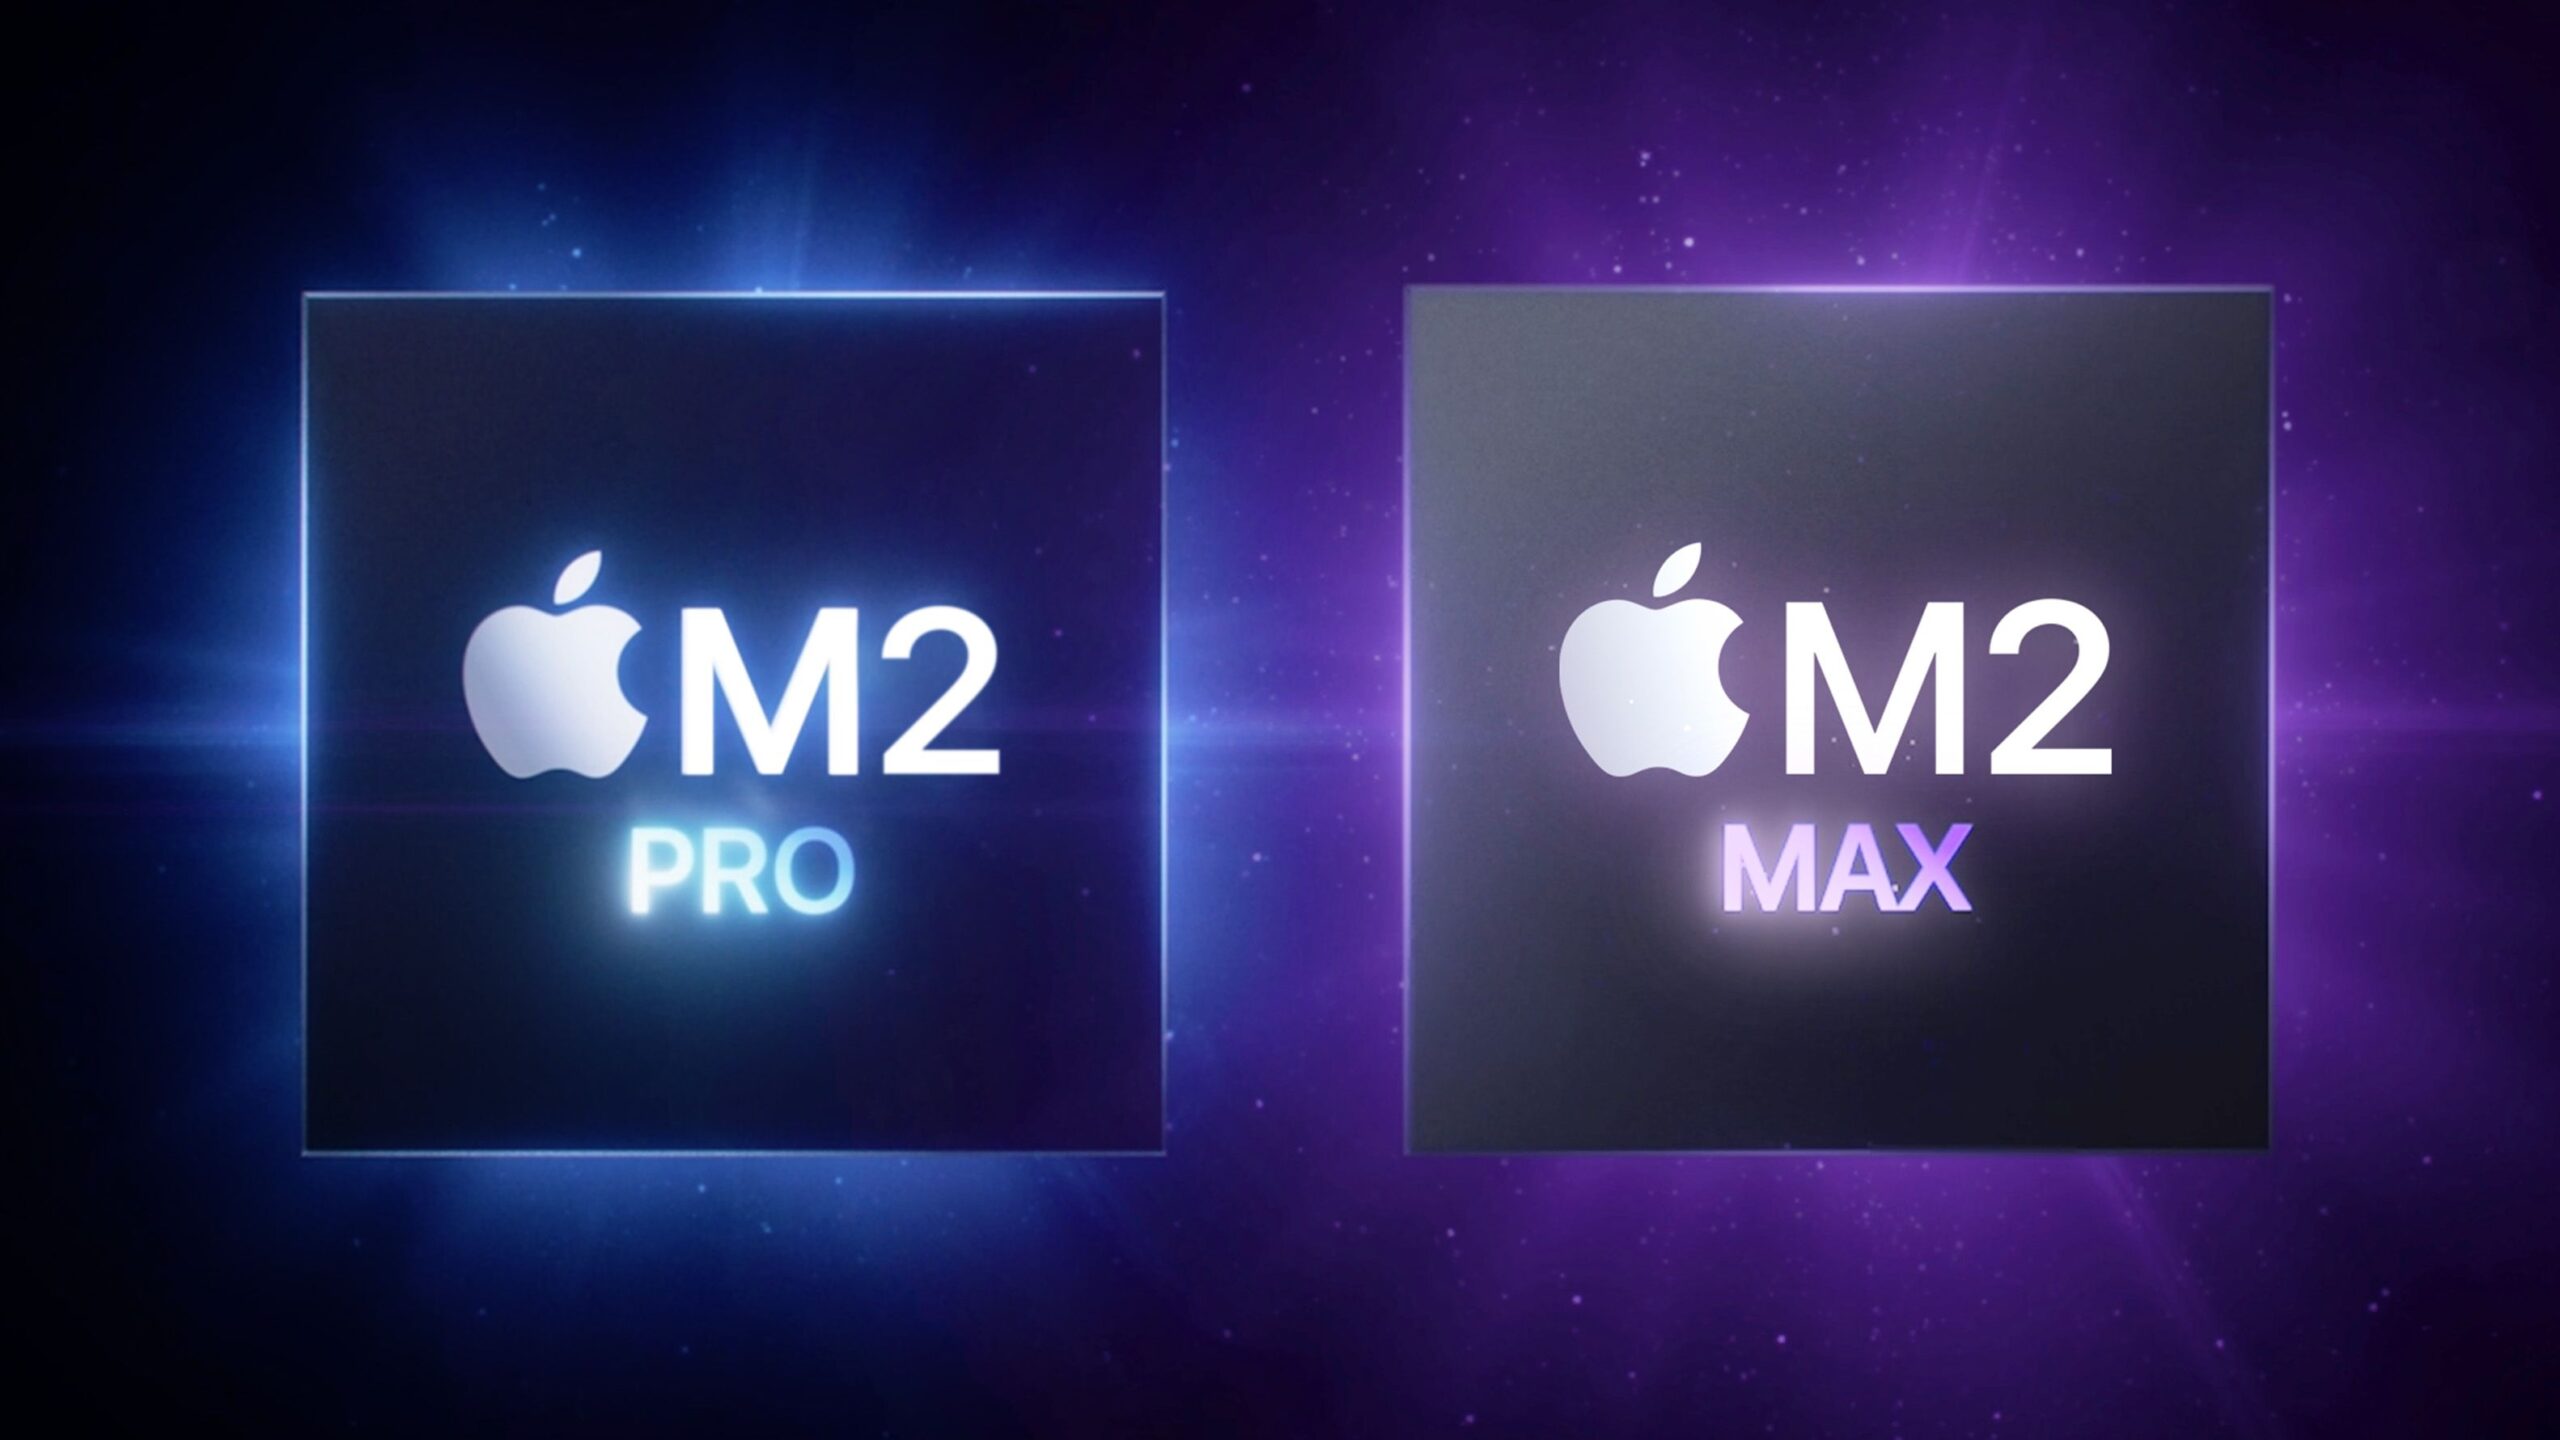 Apple Launches MacBook Pros With M2 Pro & M2 Max Chips